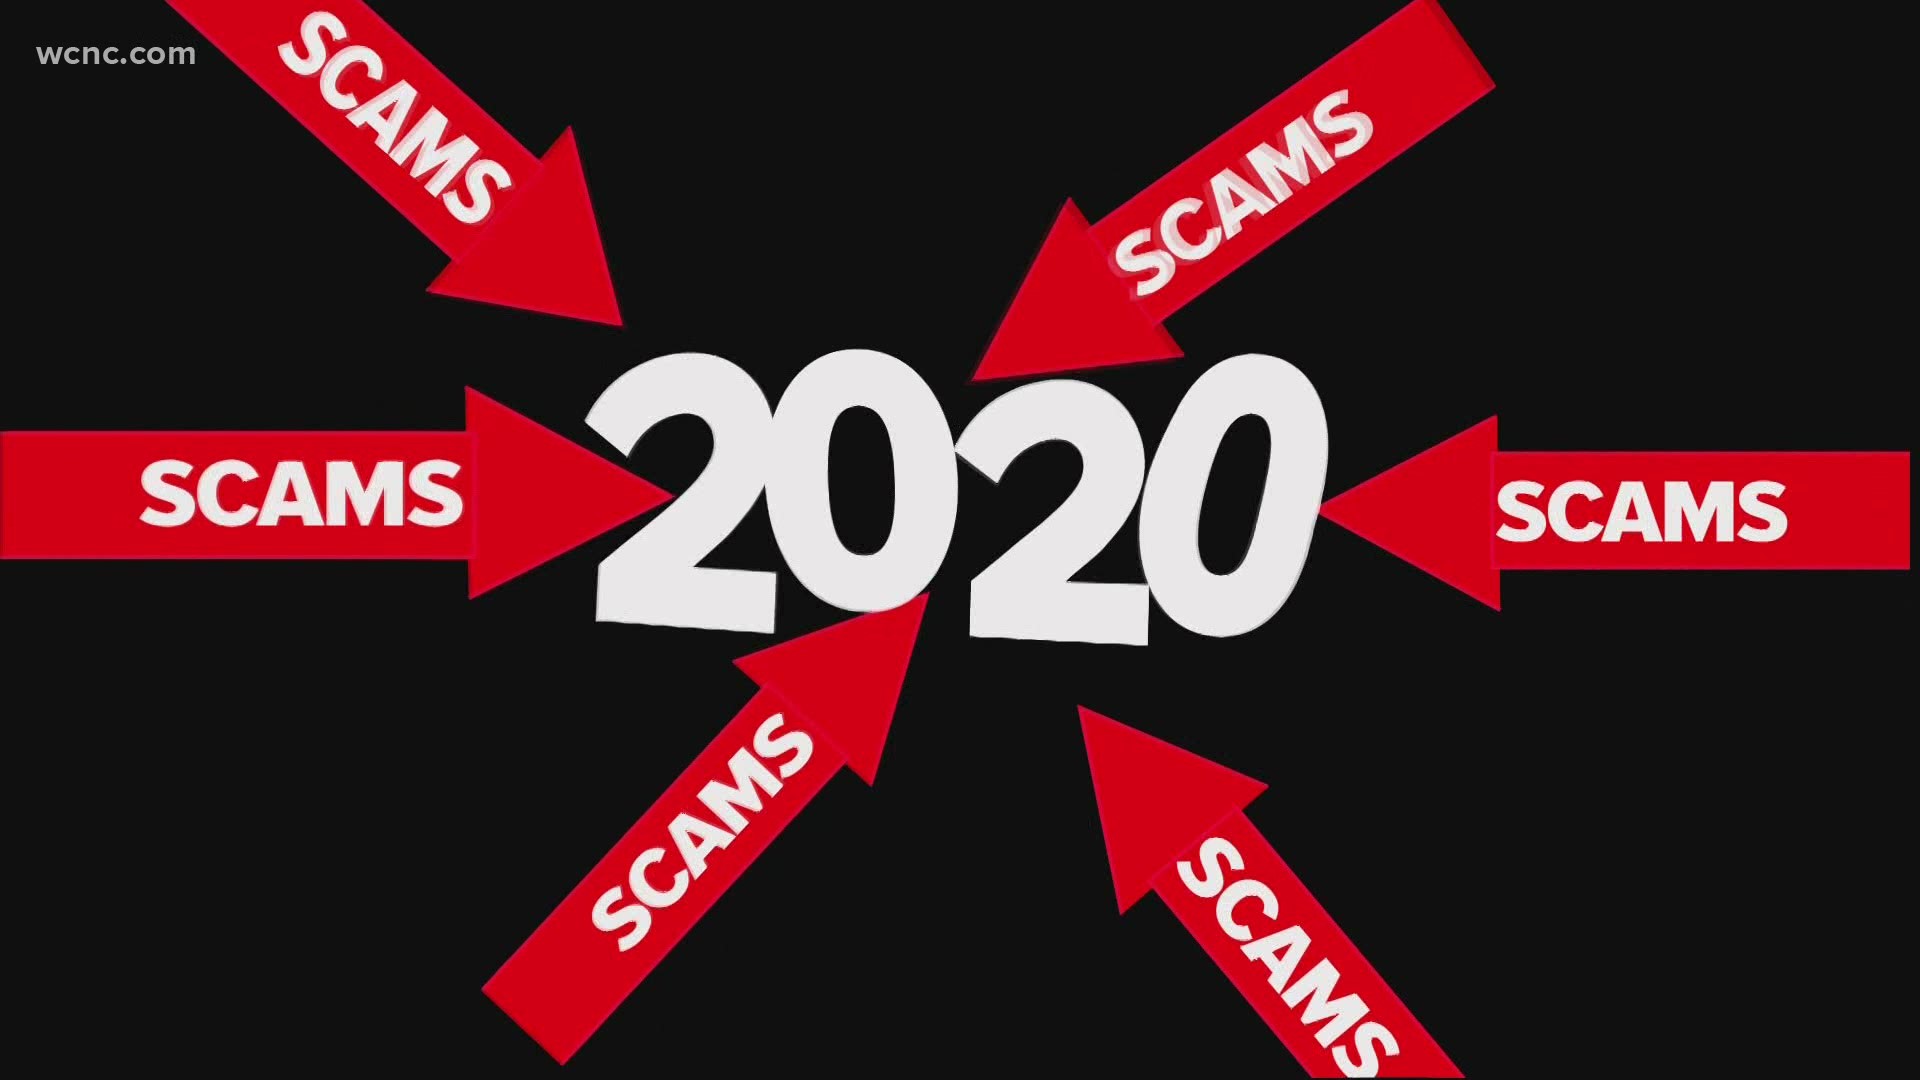 2020 was a bad year for scams, perhaps one of the worst on record.  Will 2021 be better? If January and February are any indicators, then no.